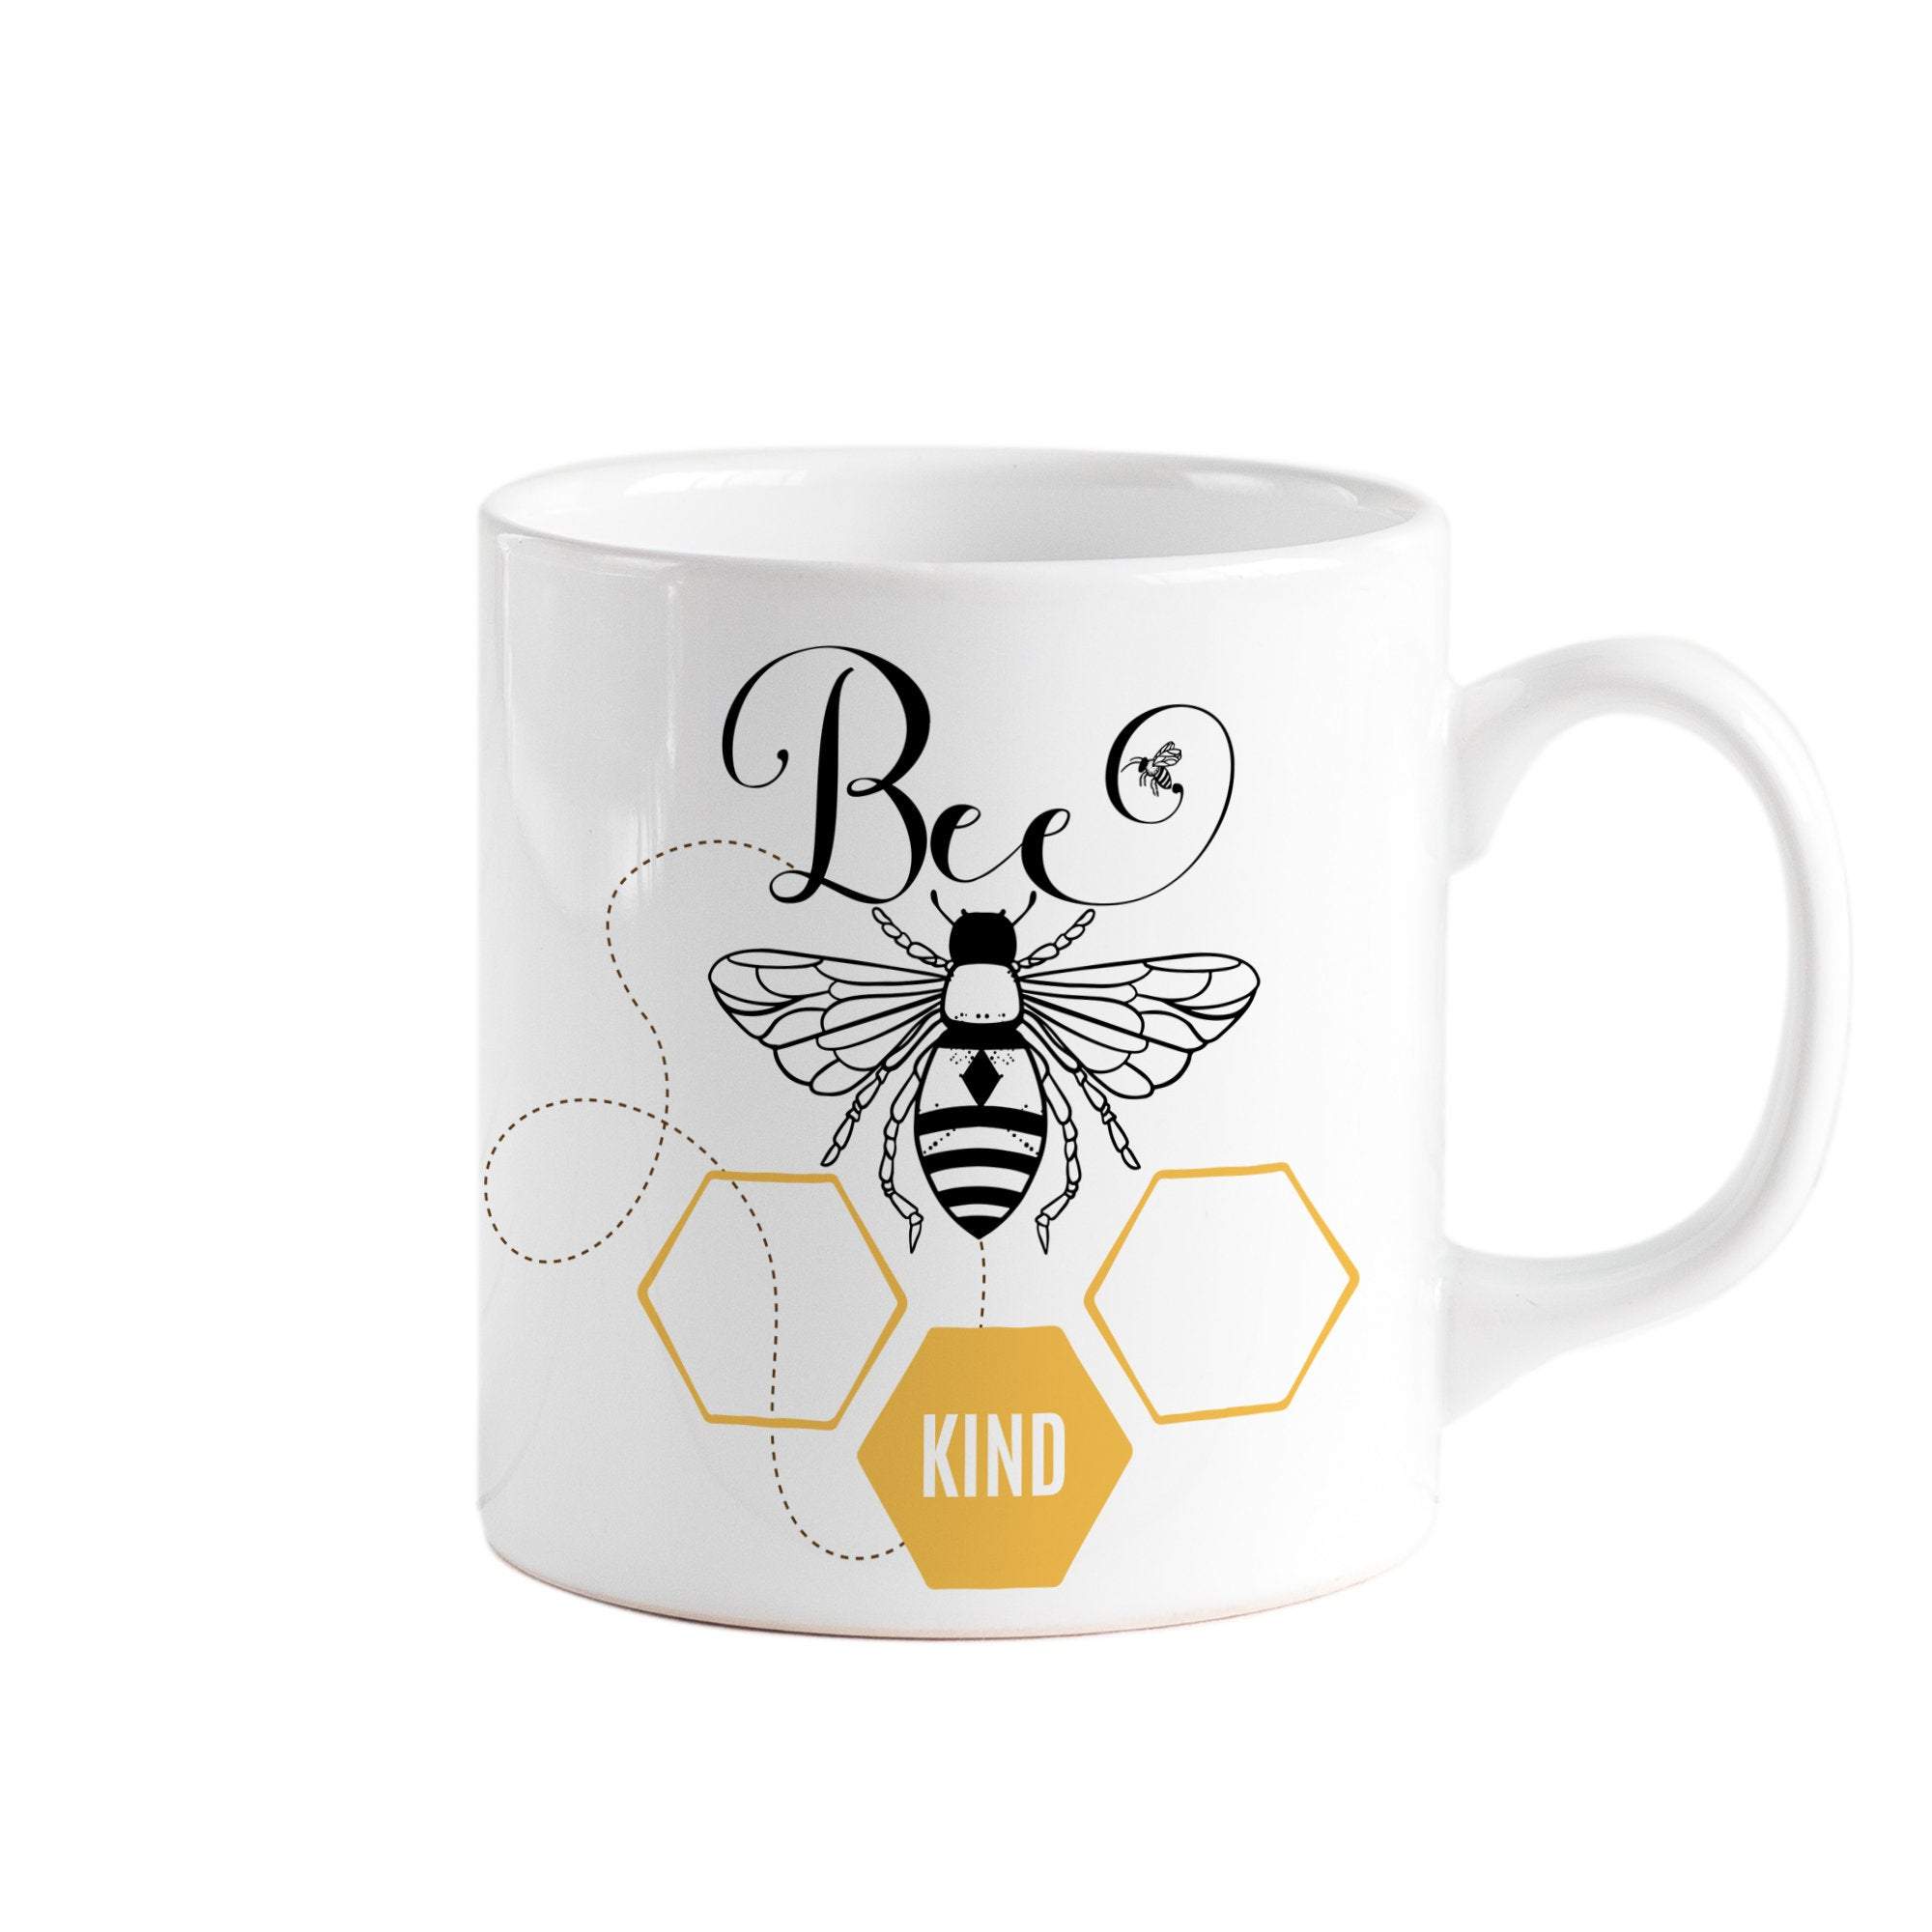 Bee kind mug, Be kind gift for her, him, colleague, employee. Positivity- Kindness- Anti-Bullying gift, Vegan gift